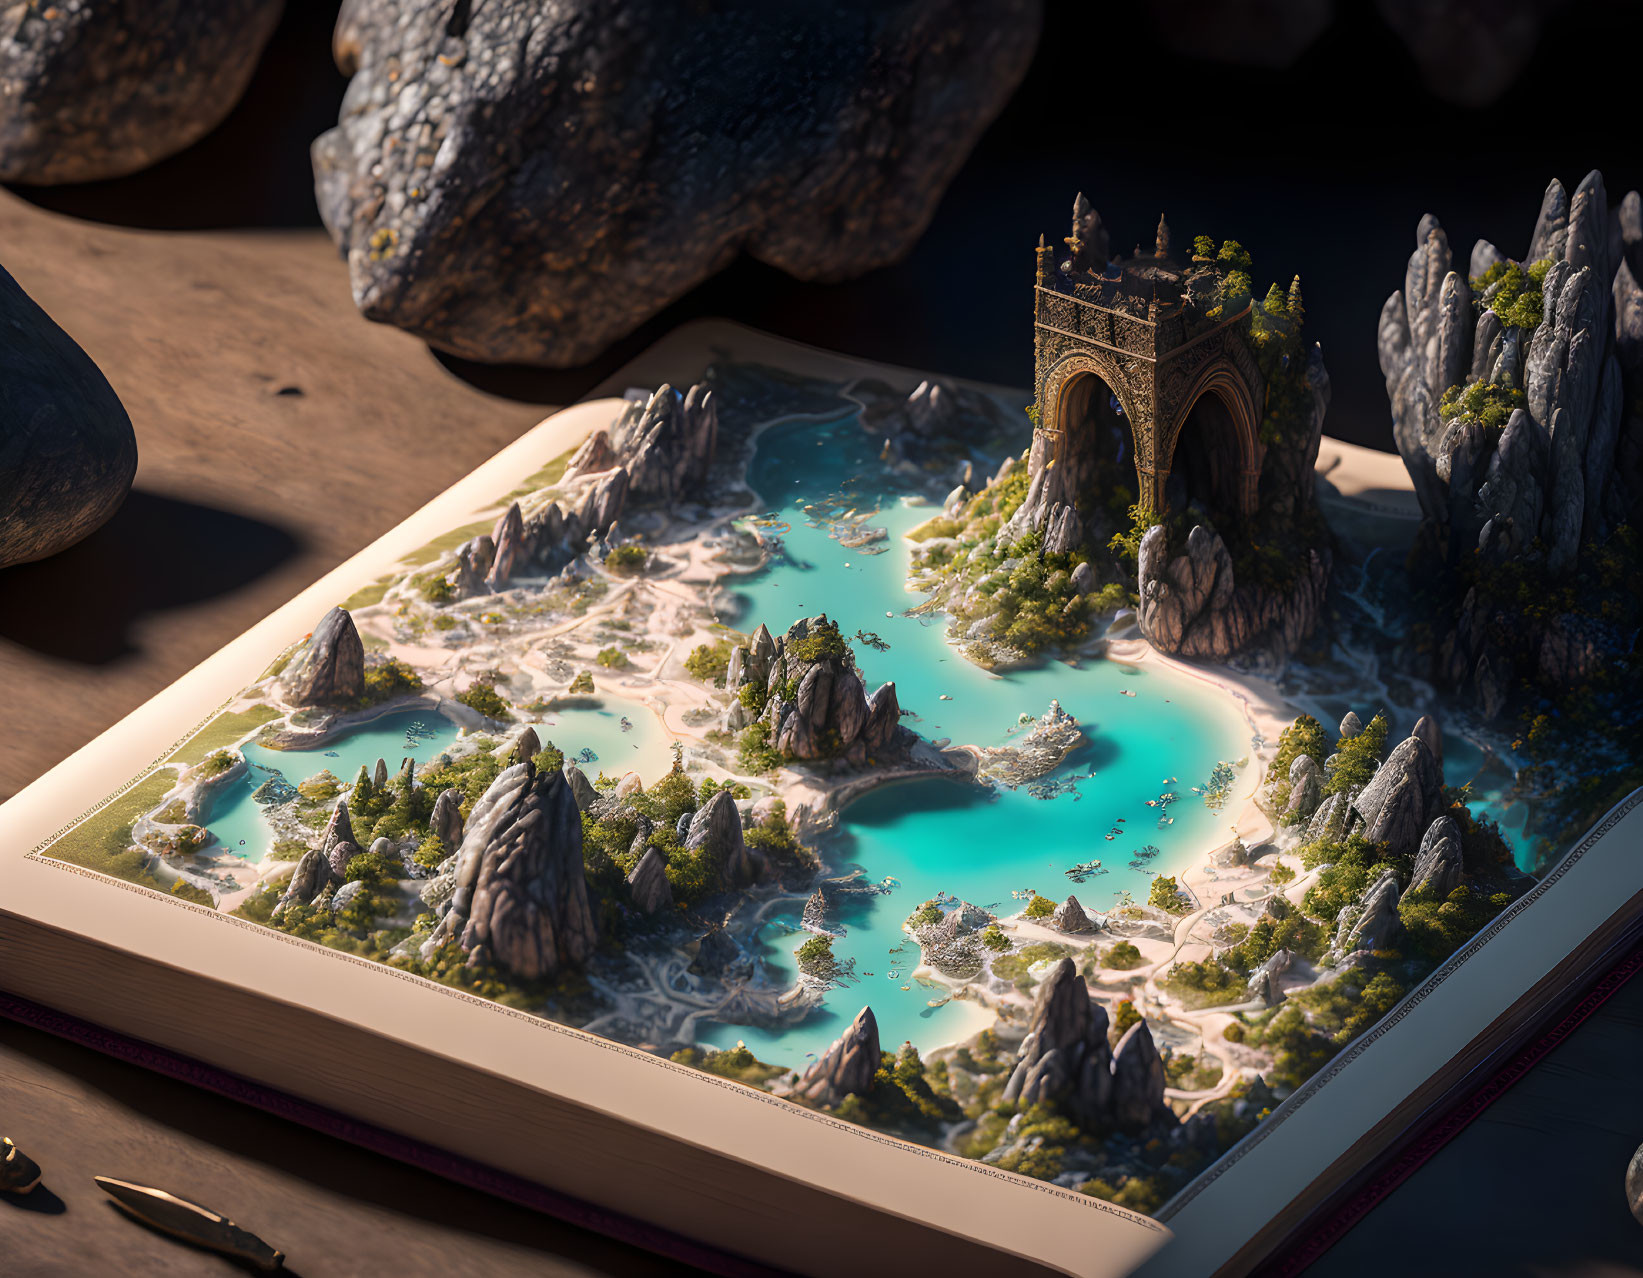 Fantasy landscape depicted in open book with archway, islets, and quill pen